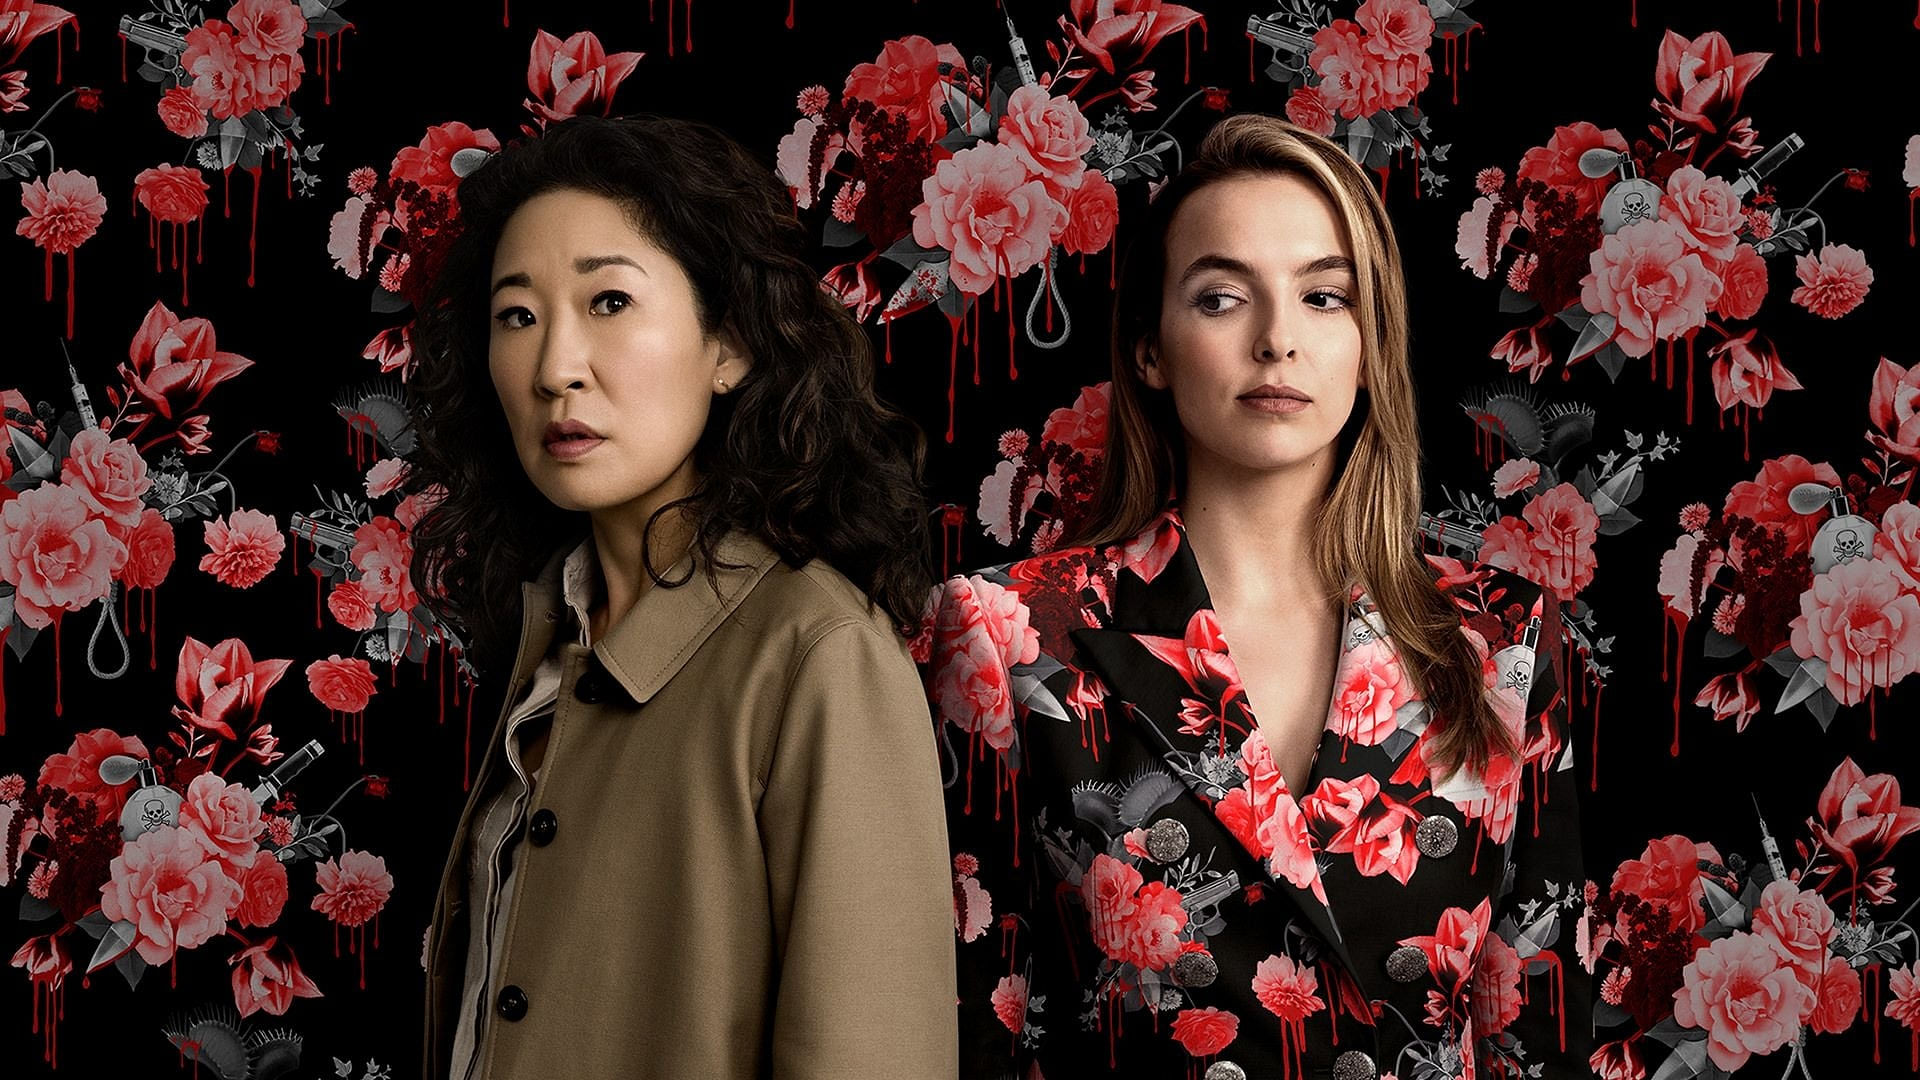 Killing Eve is a spy-drama that tells the story of Eve Polastri (Sandra Oh) and Villanelle (Jodie Comer).